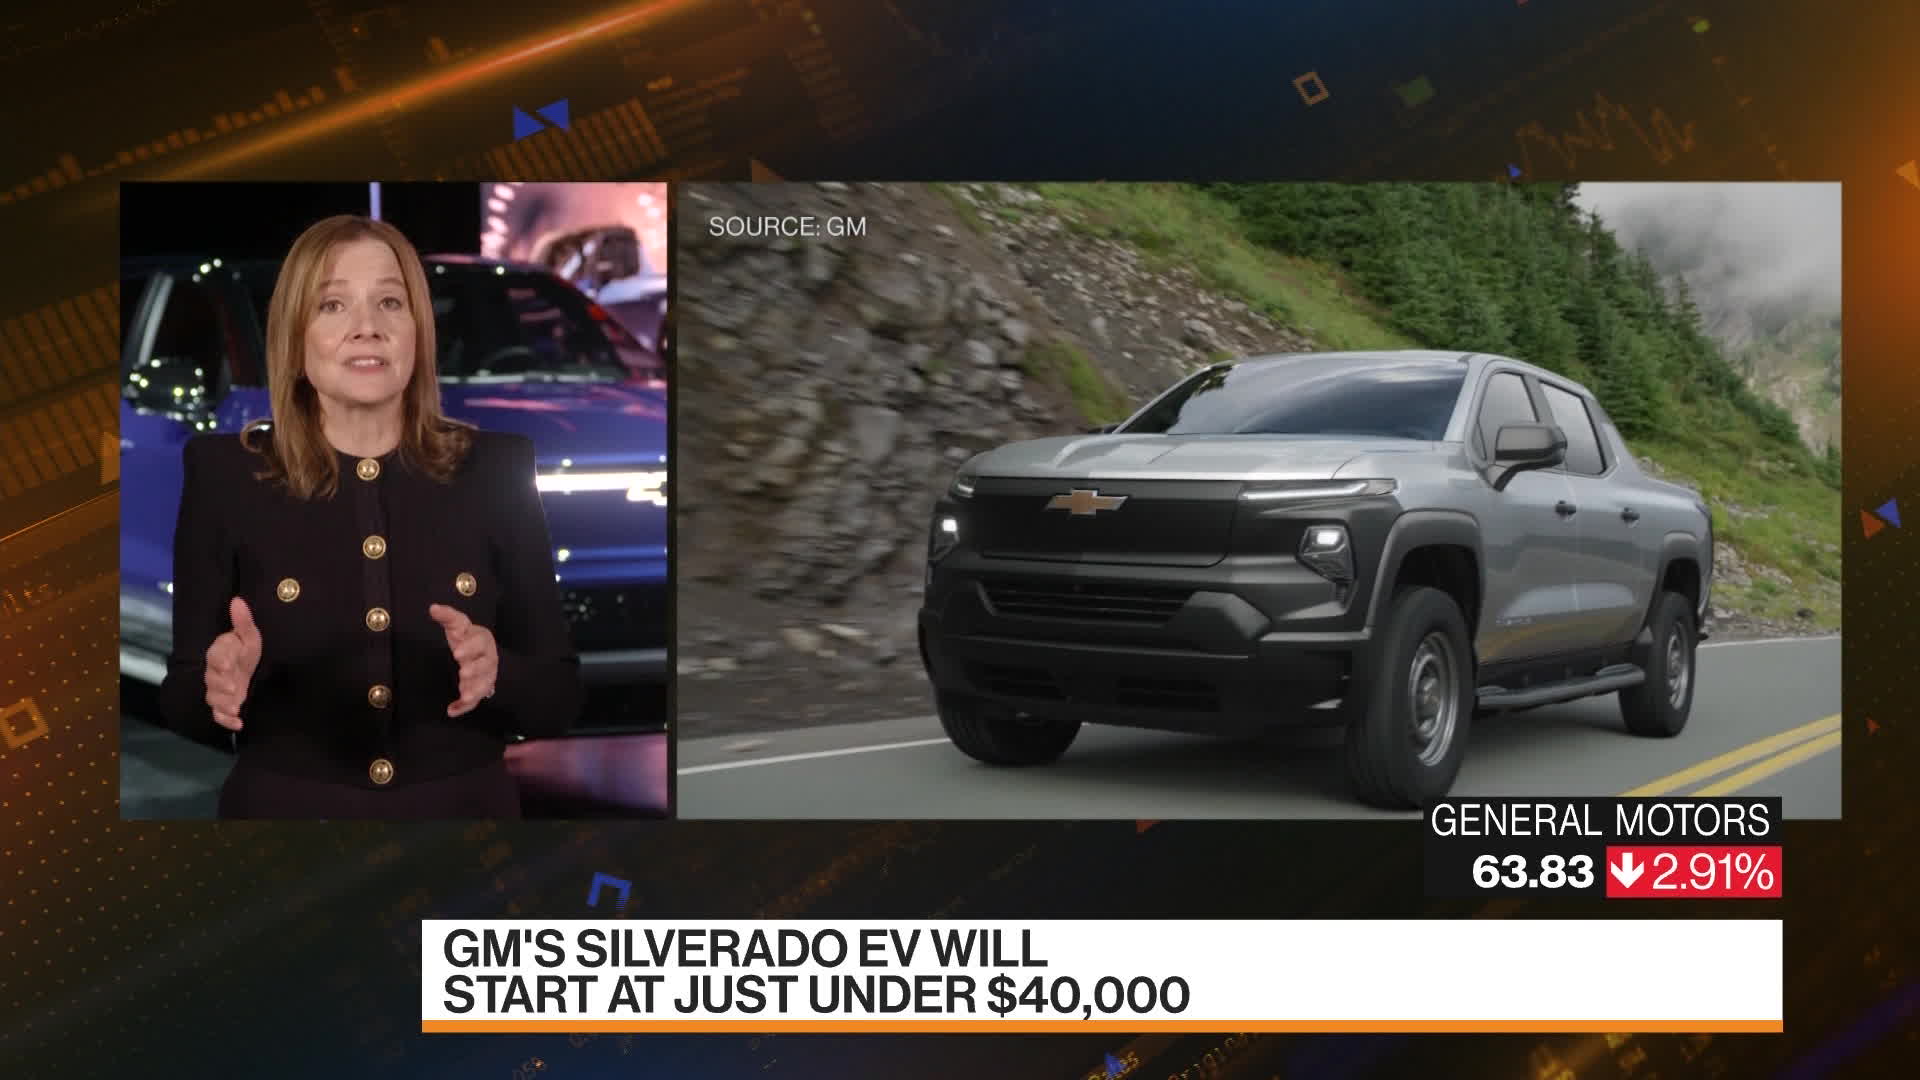 GM’s Electric Silverado Goes Up Against Ford’s F-150 Lightning